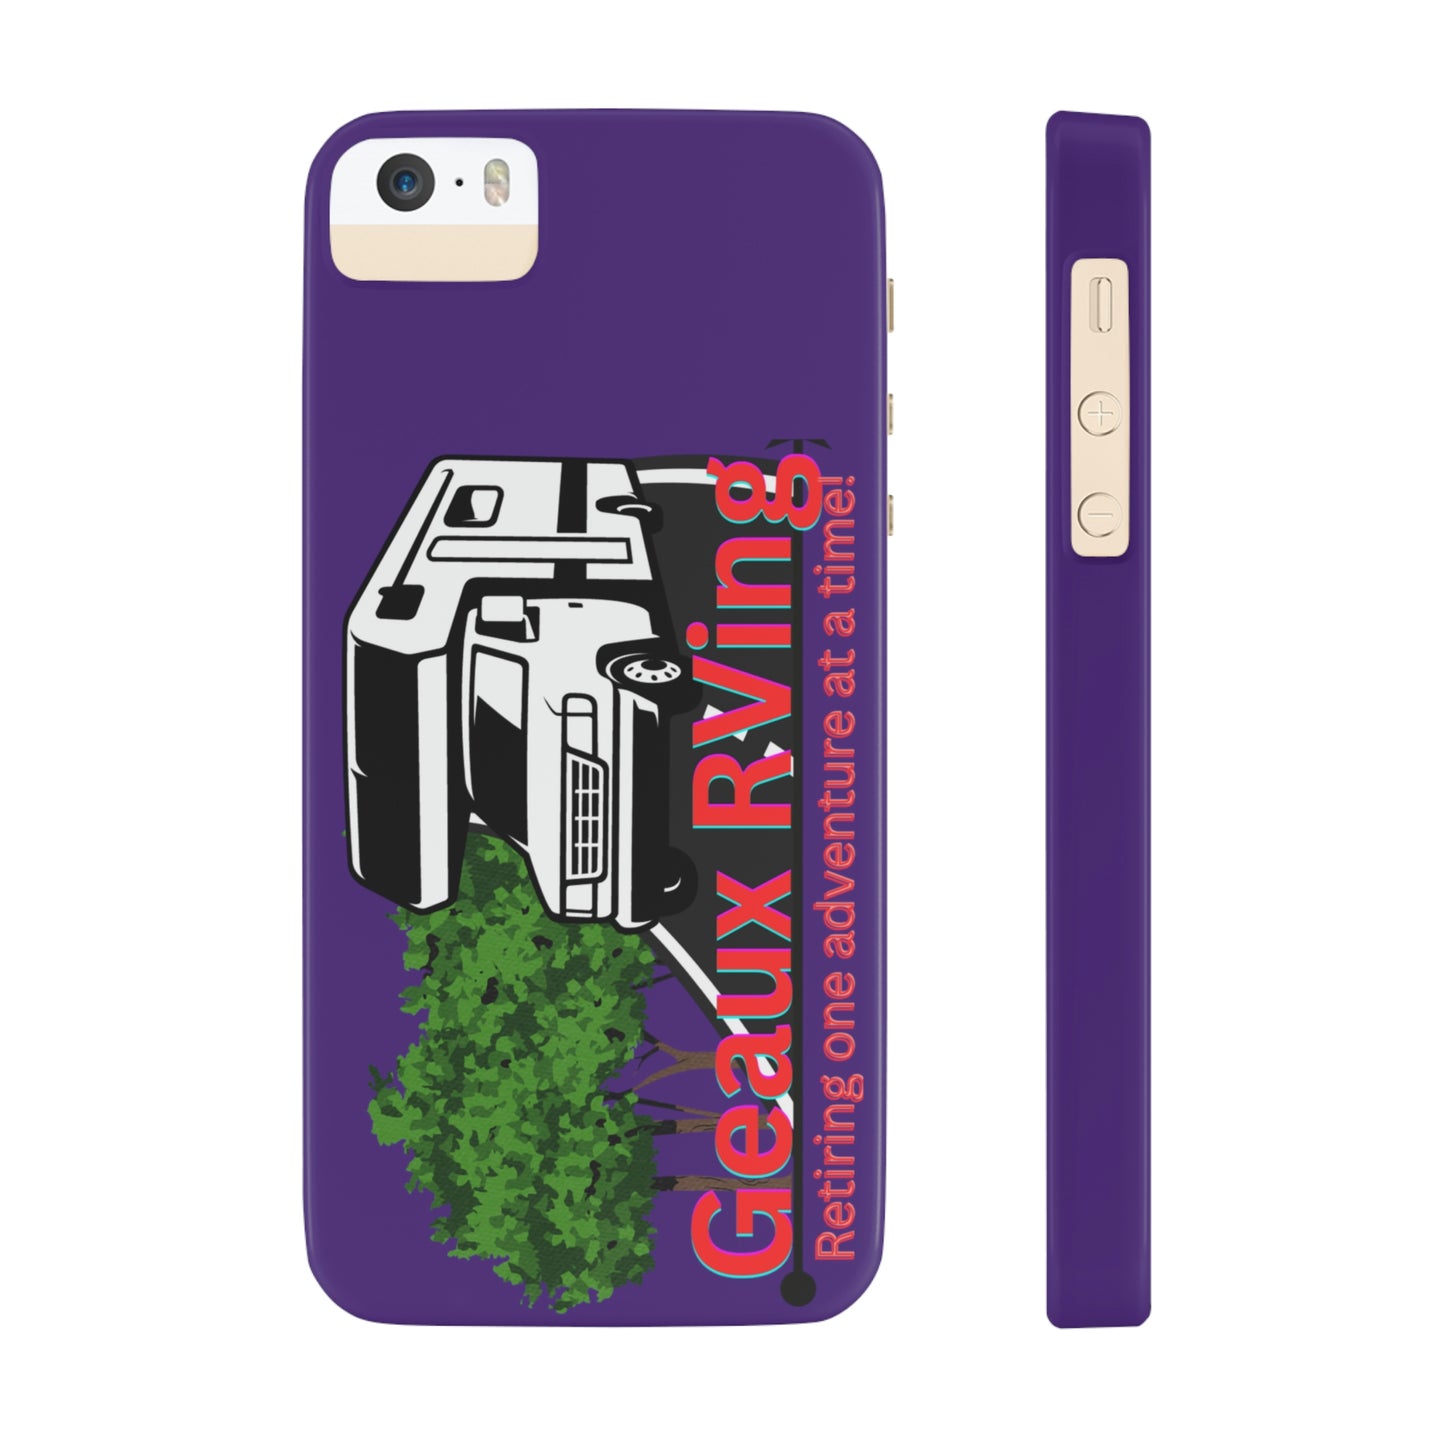 Geaux RVing with Style: The Ultimate Phone Case for Adventure Seekers - Motorhome